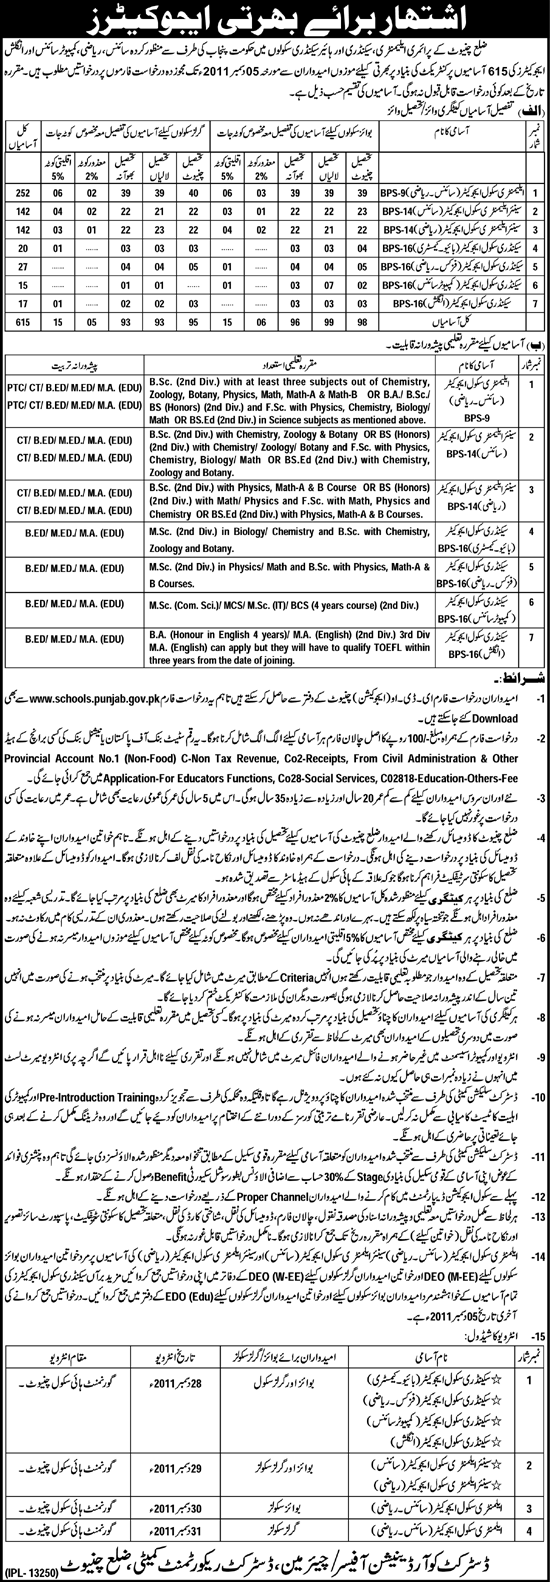 Educators Required by Government of the Punjab, for Chinniot District